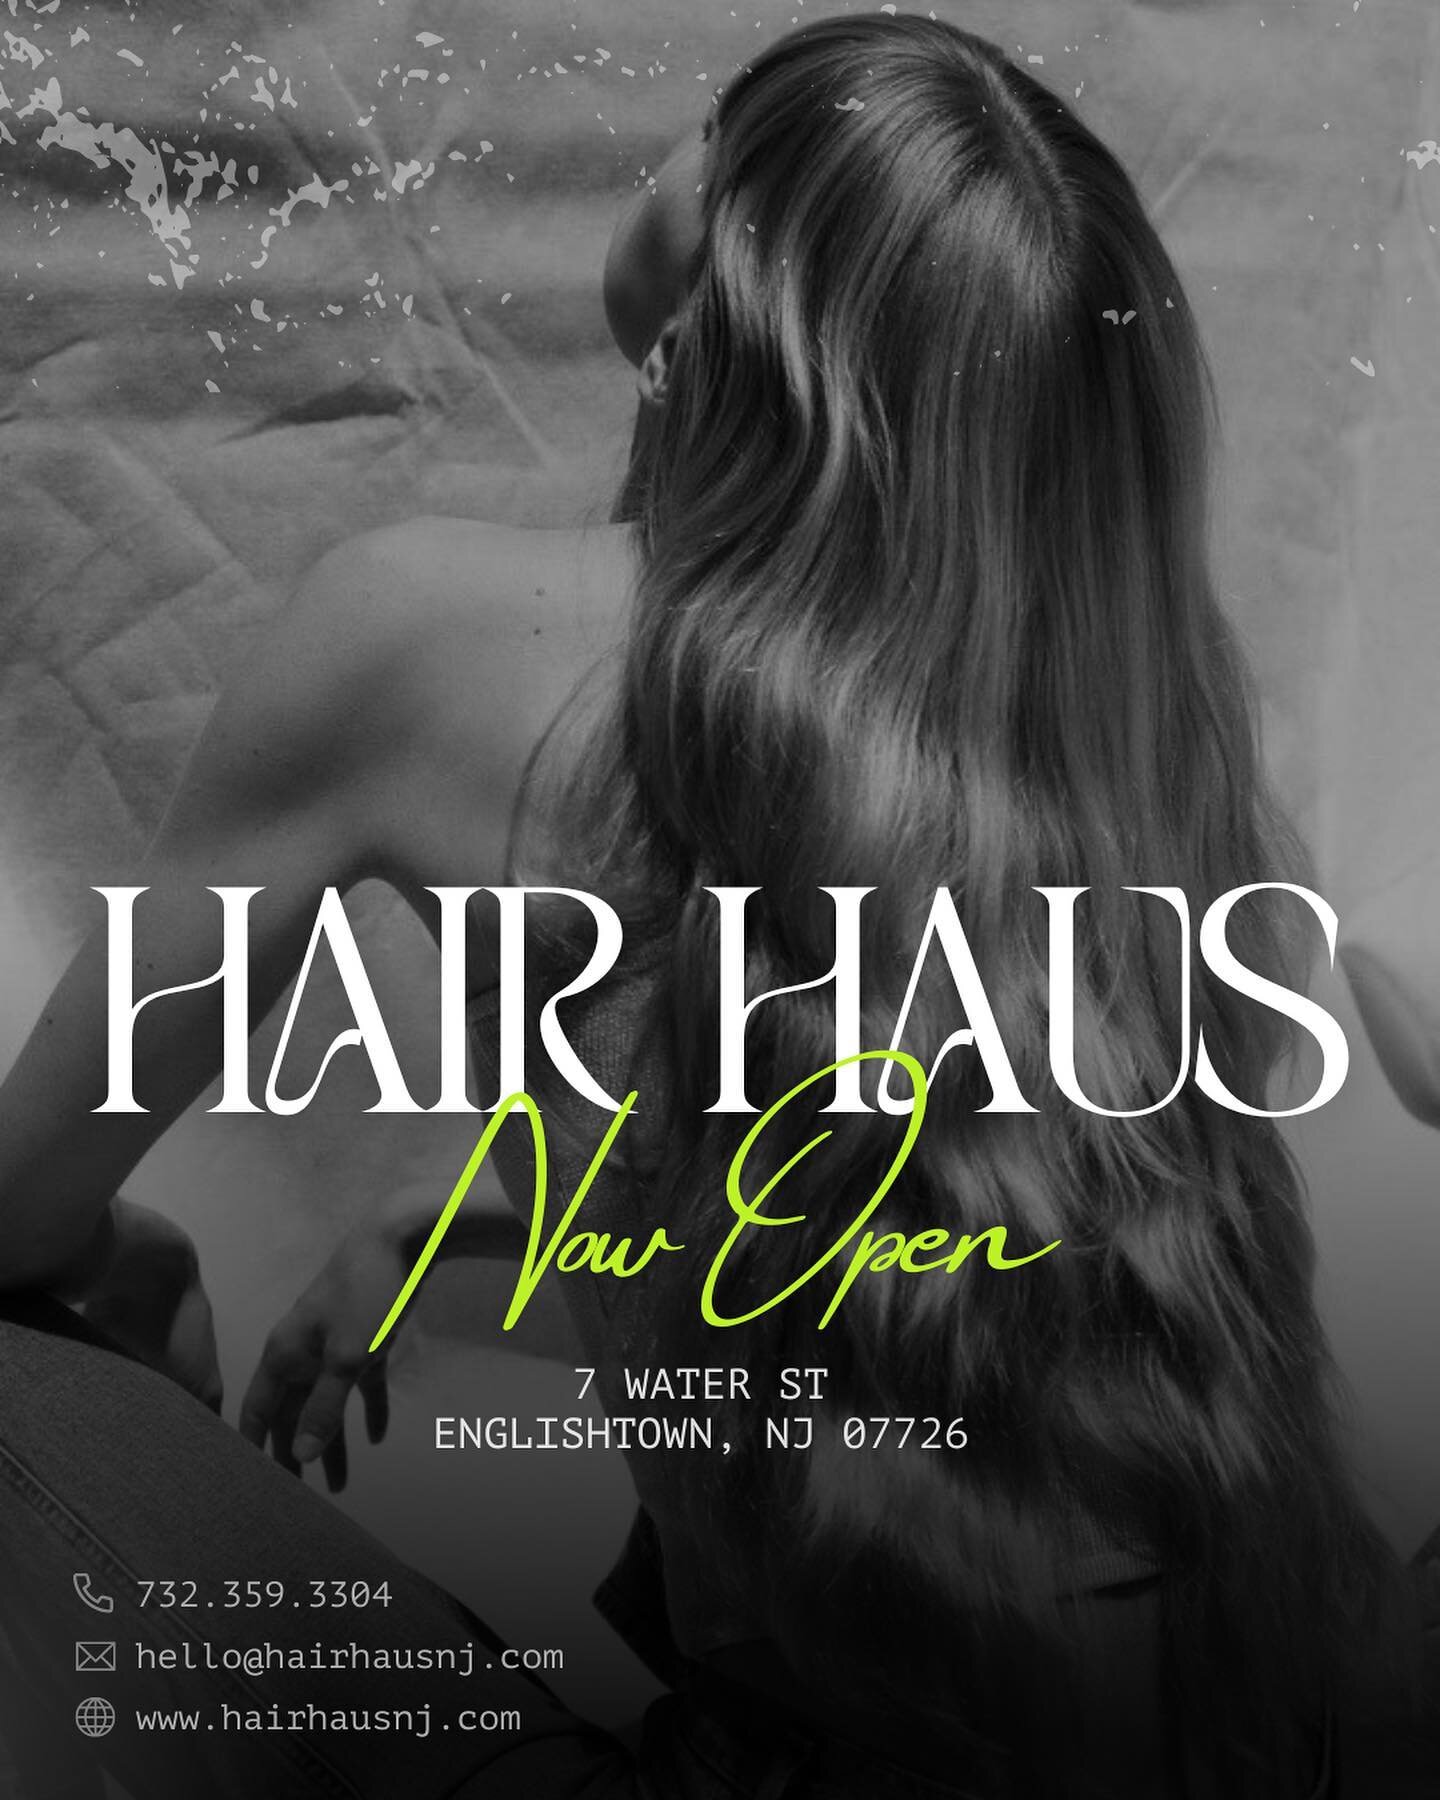 We&rsquo;re so excited to announce that HAIR HAUS is officially open for business! 

We look forward to seeing everyone in our new space and all the transformations that will unfold here. We are beyond thankful for everyone&rsquo;s patience and suppo